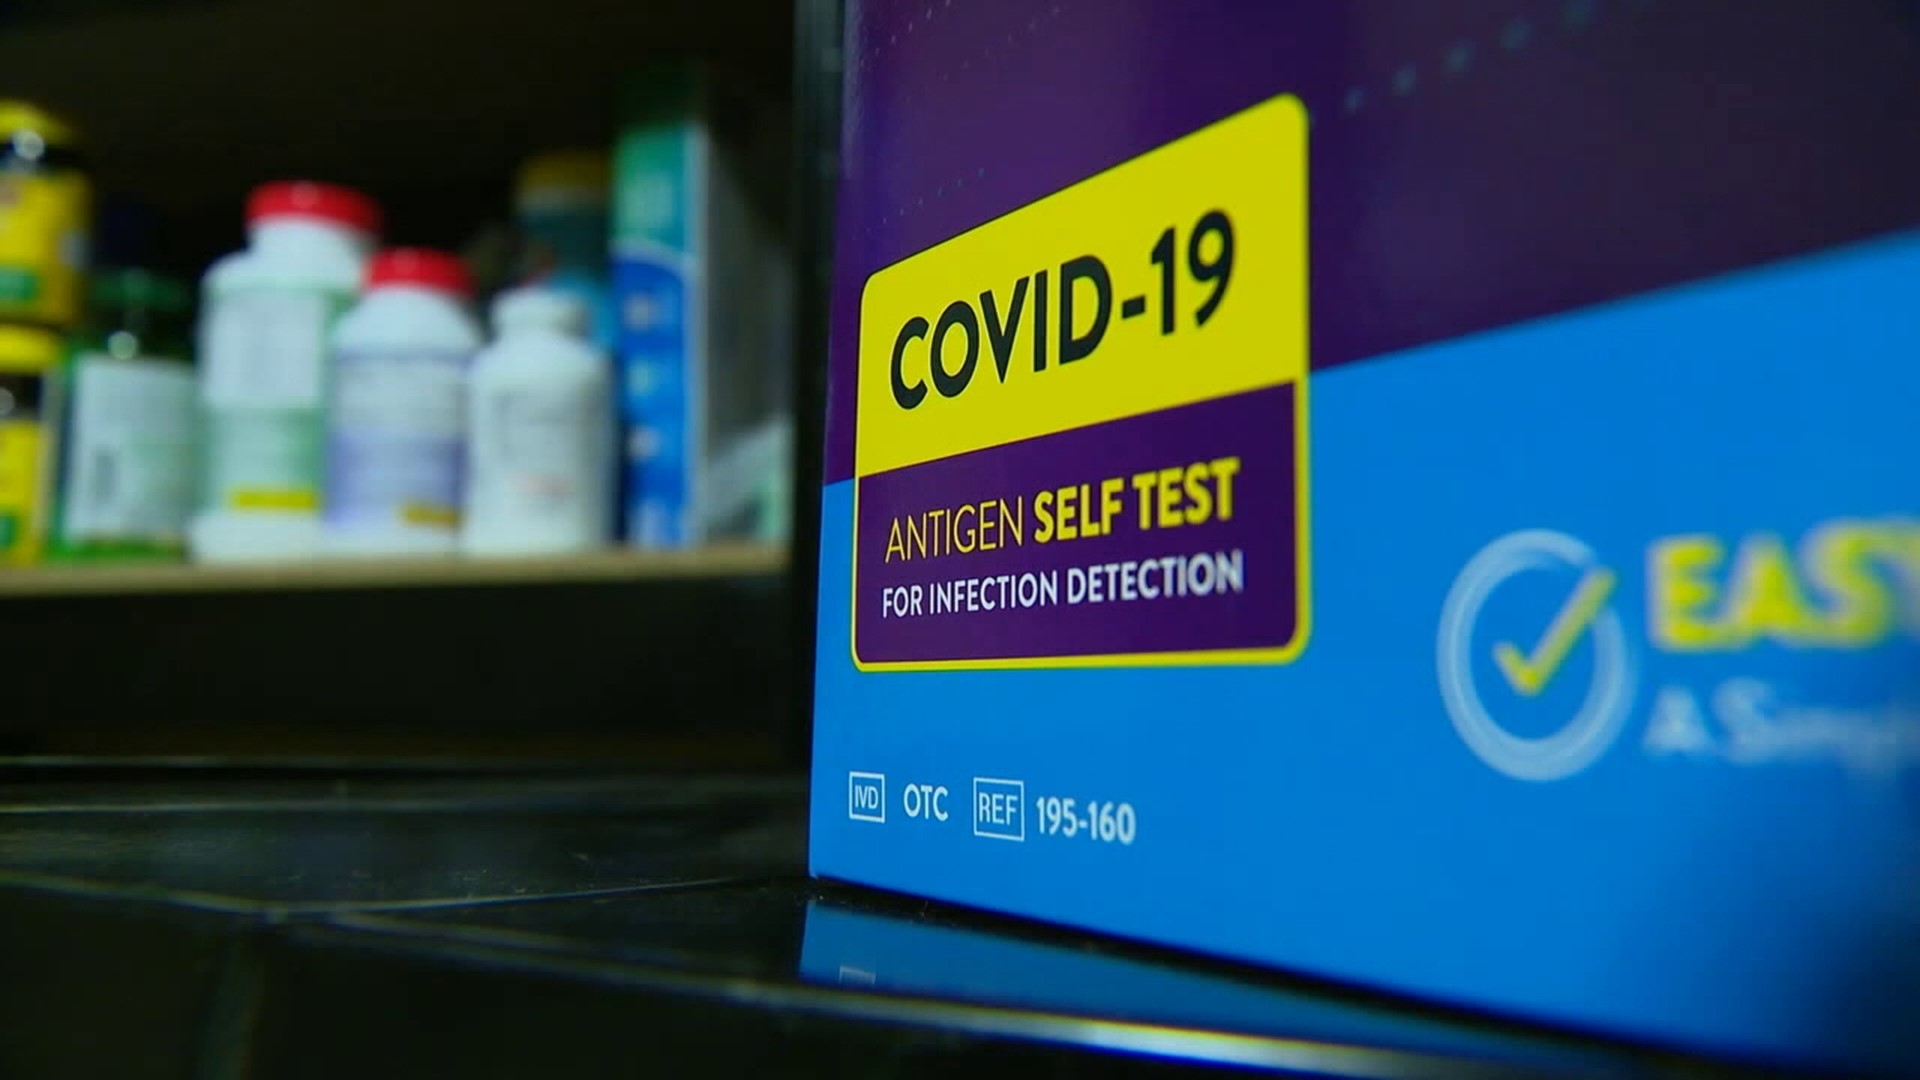 You can now get free at-home COVID testing kits
from the federal government sent right to your front door.